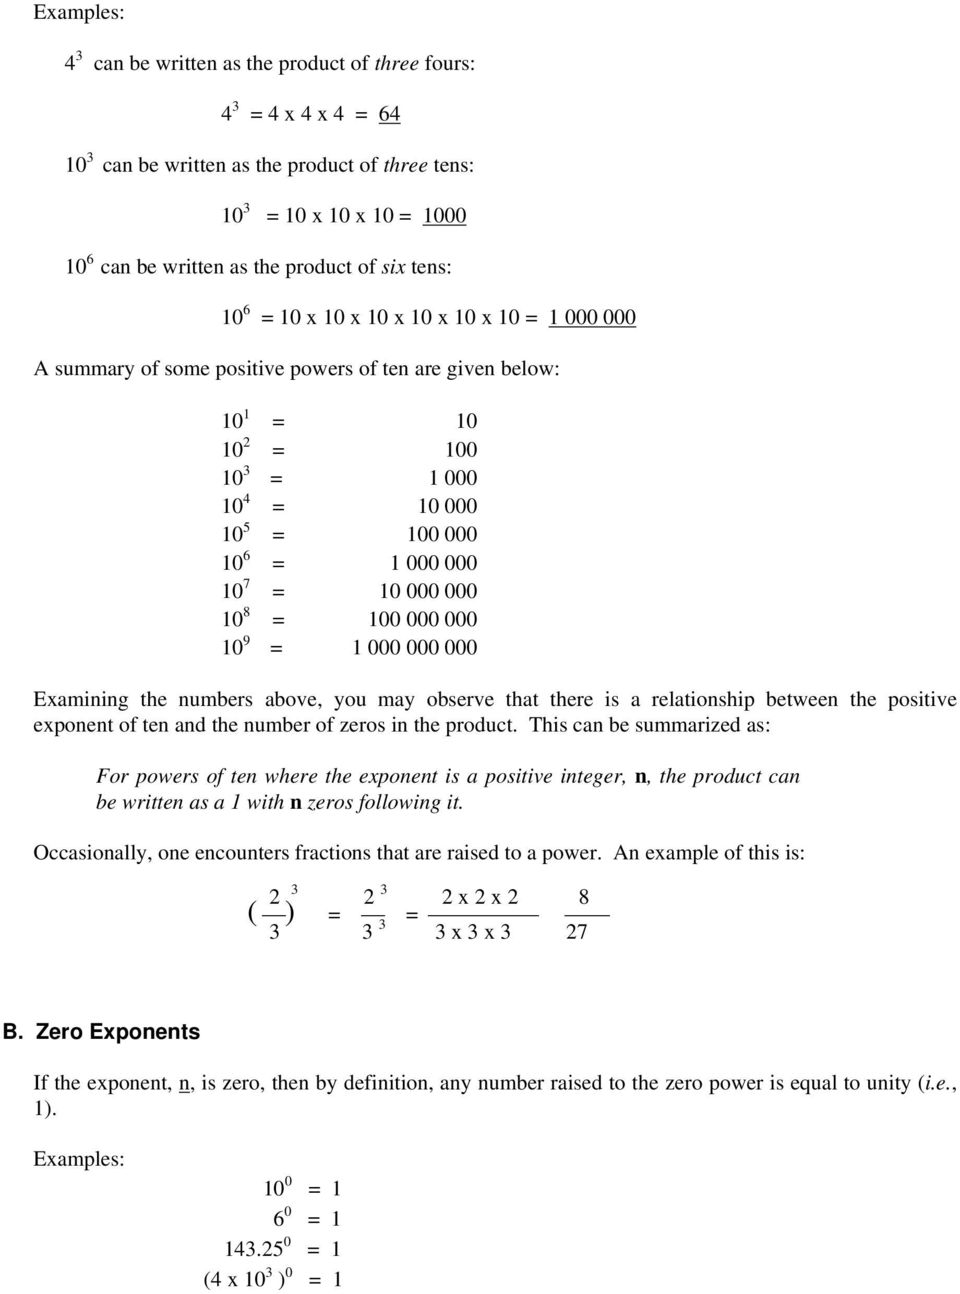 10 8 = 100 000 000 10 9 = 1 000 000 000 Examining the numbers above, you may observe that there is a relationship between the positive exponent of ten and the number of zeros in the product.